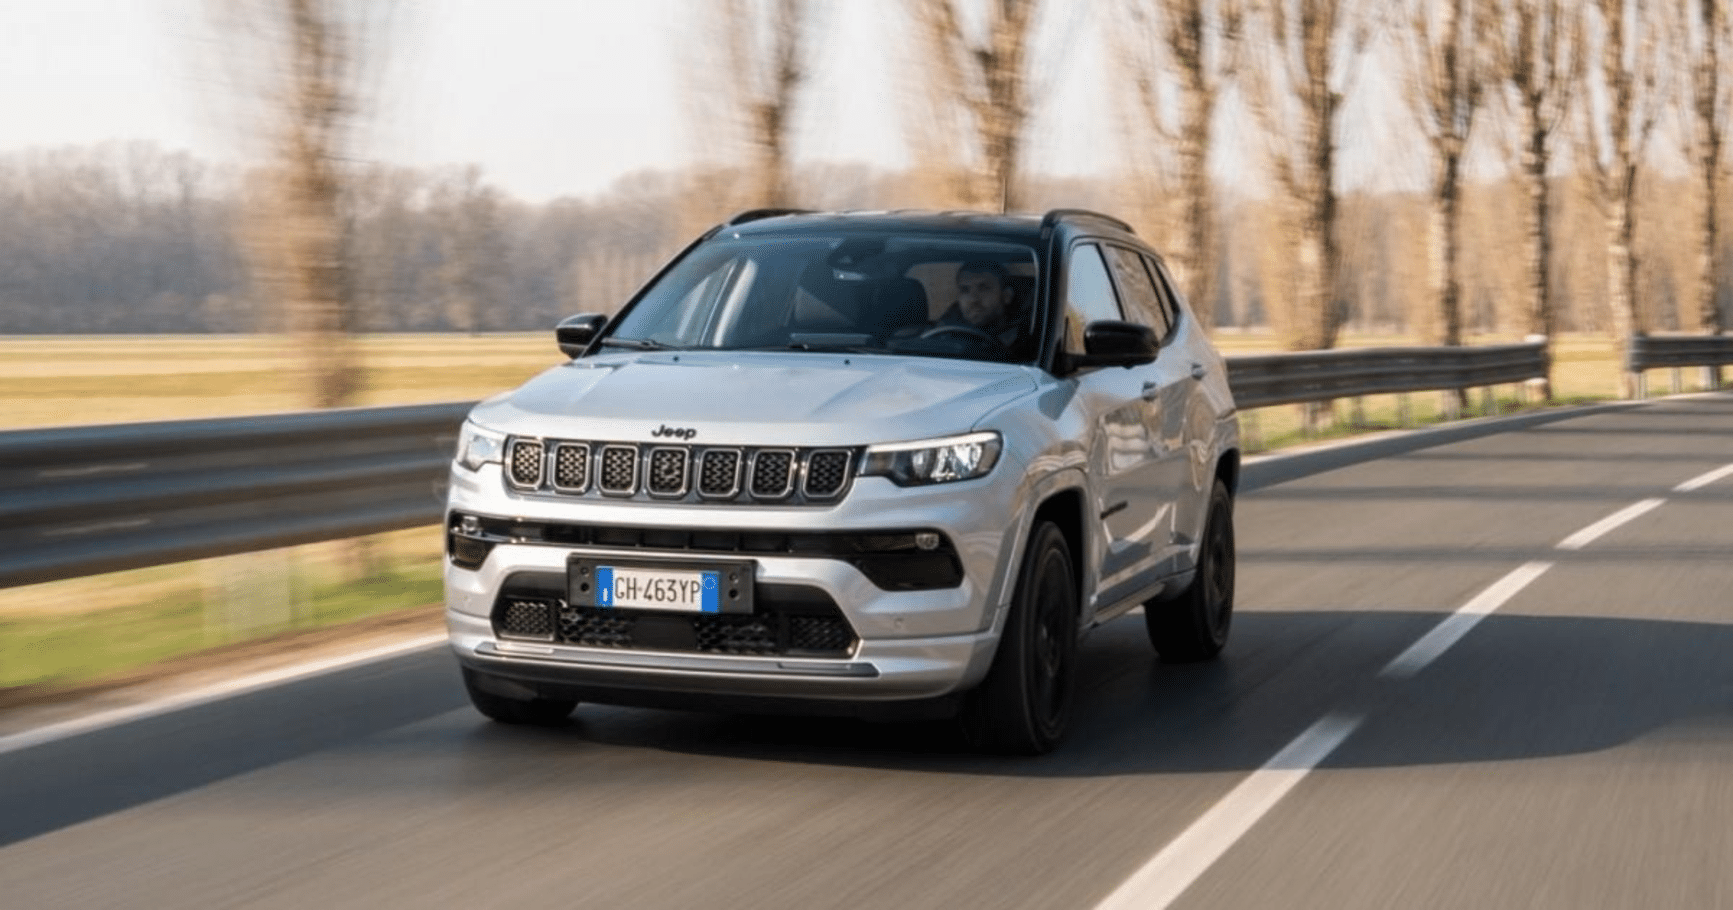 Jeep Compass Goes Electric: A Shift Towards Electrification